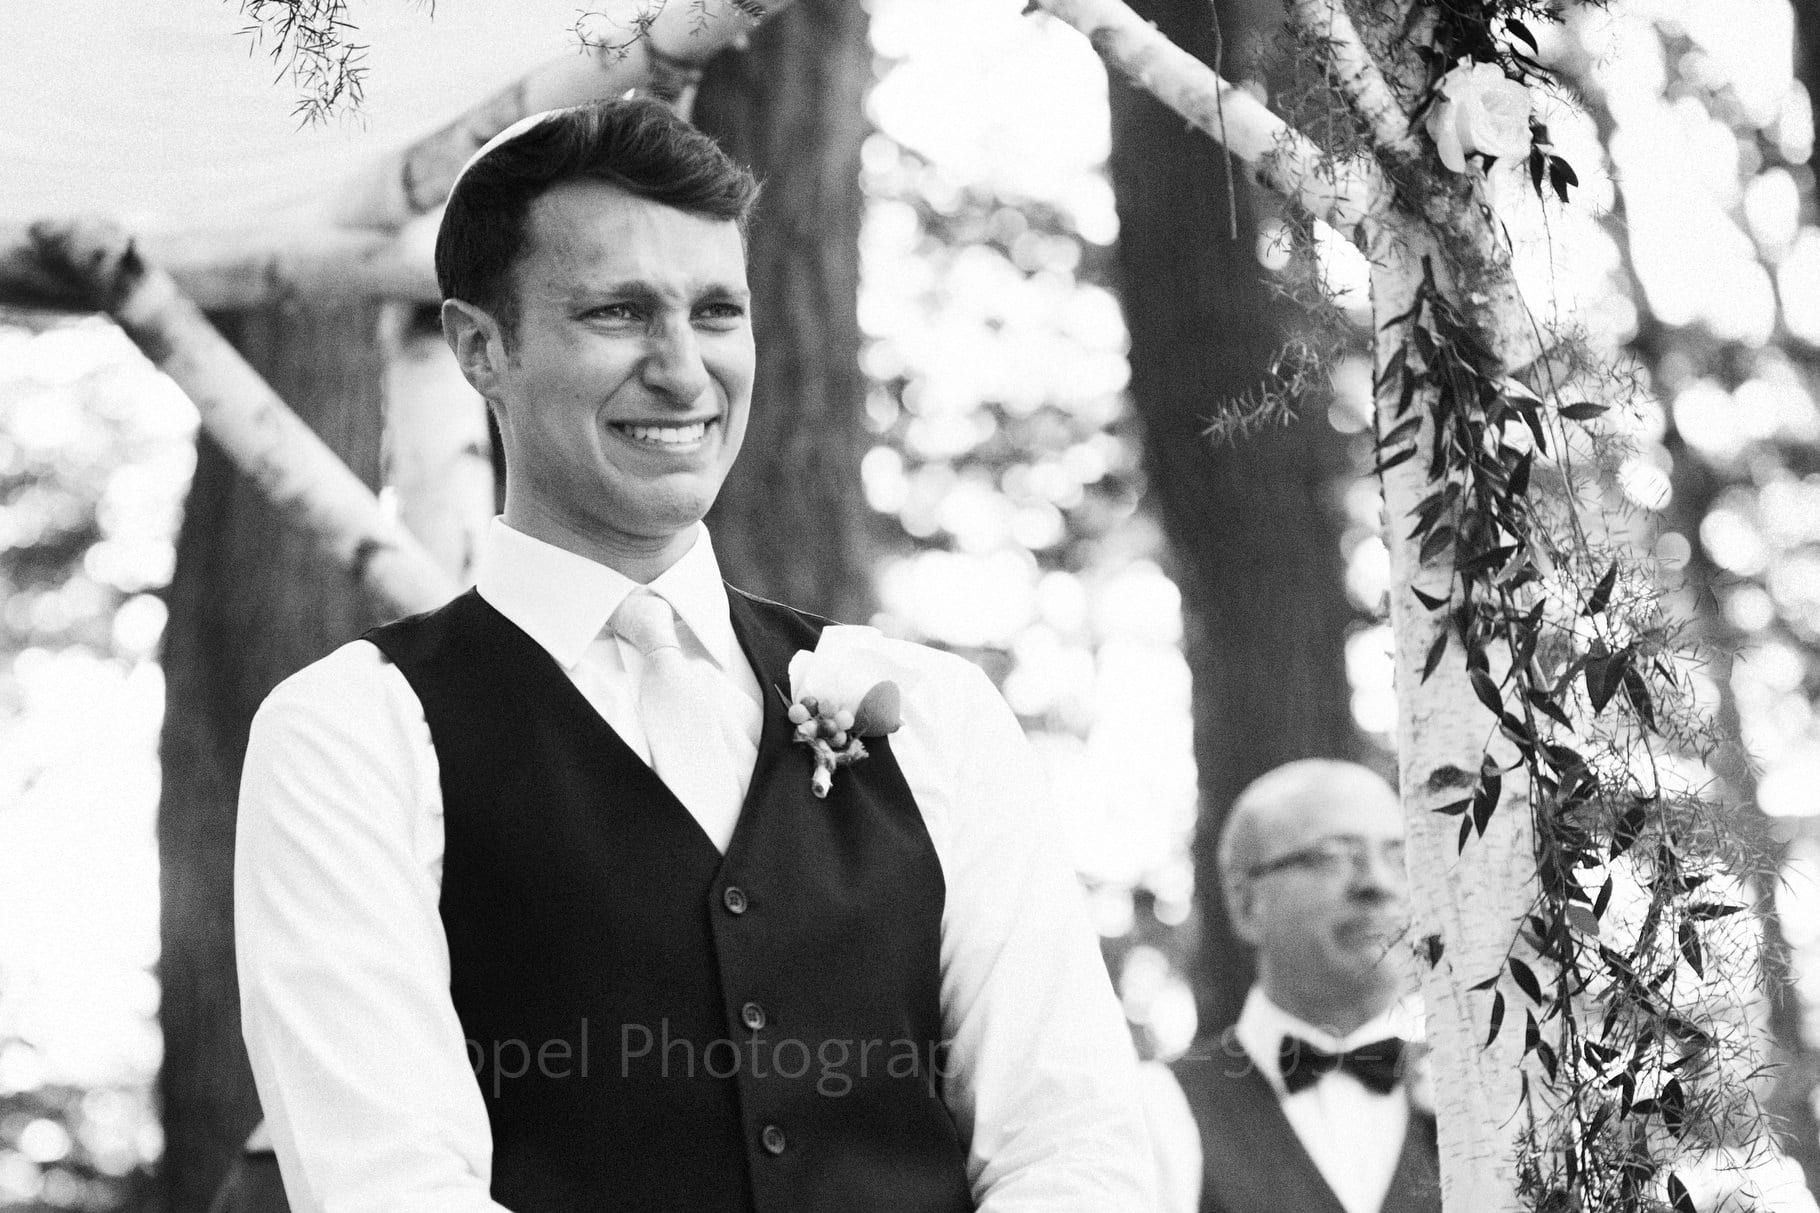 A groom is overcome with emotion as he sees his bride walking towards him.